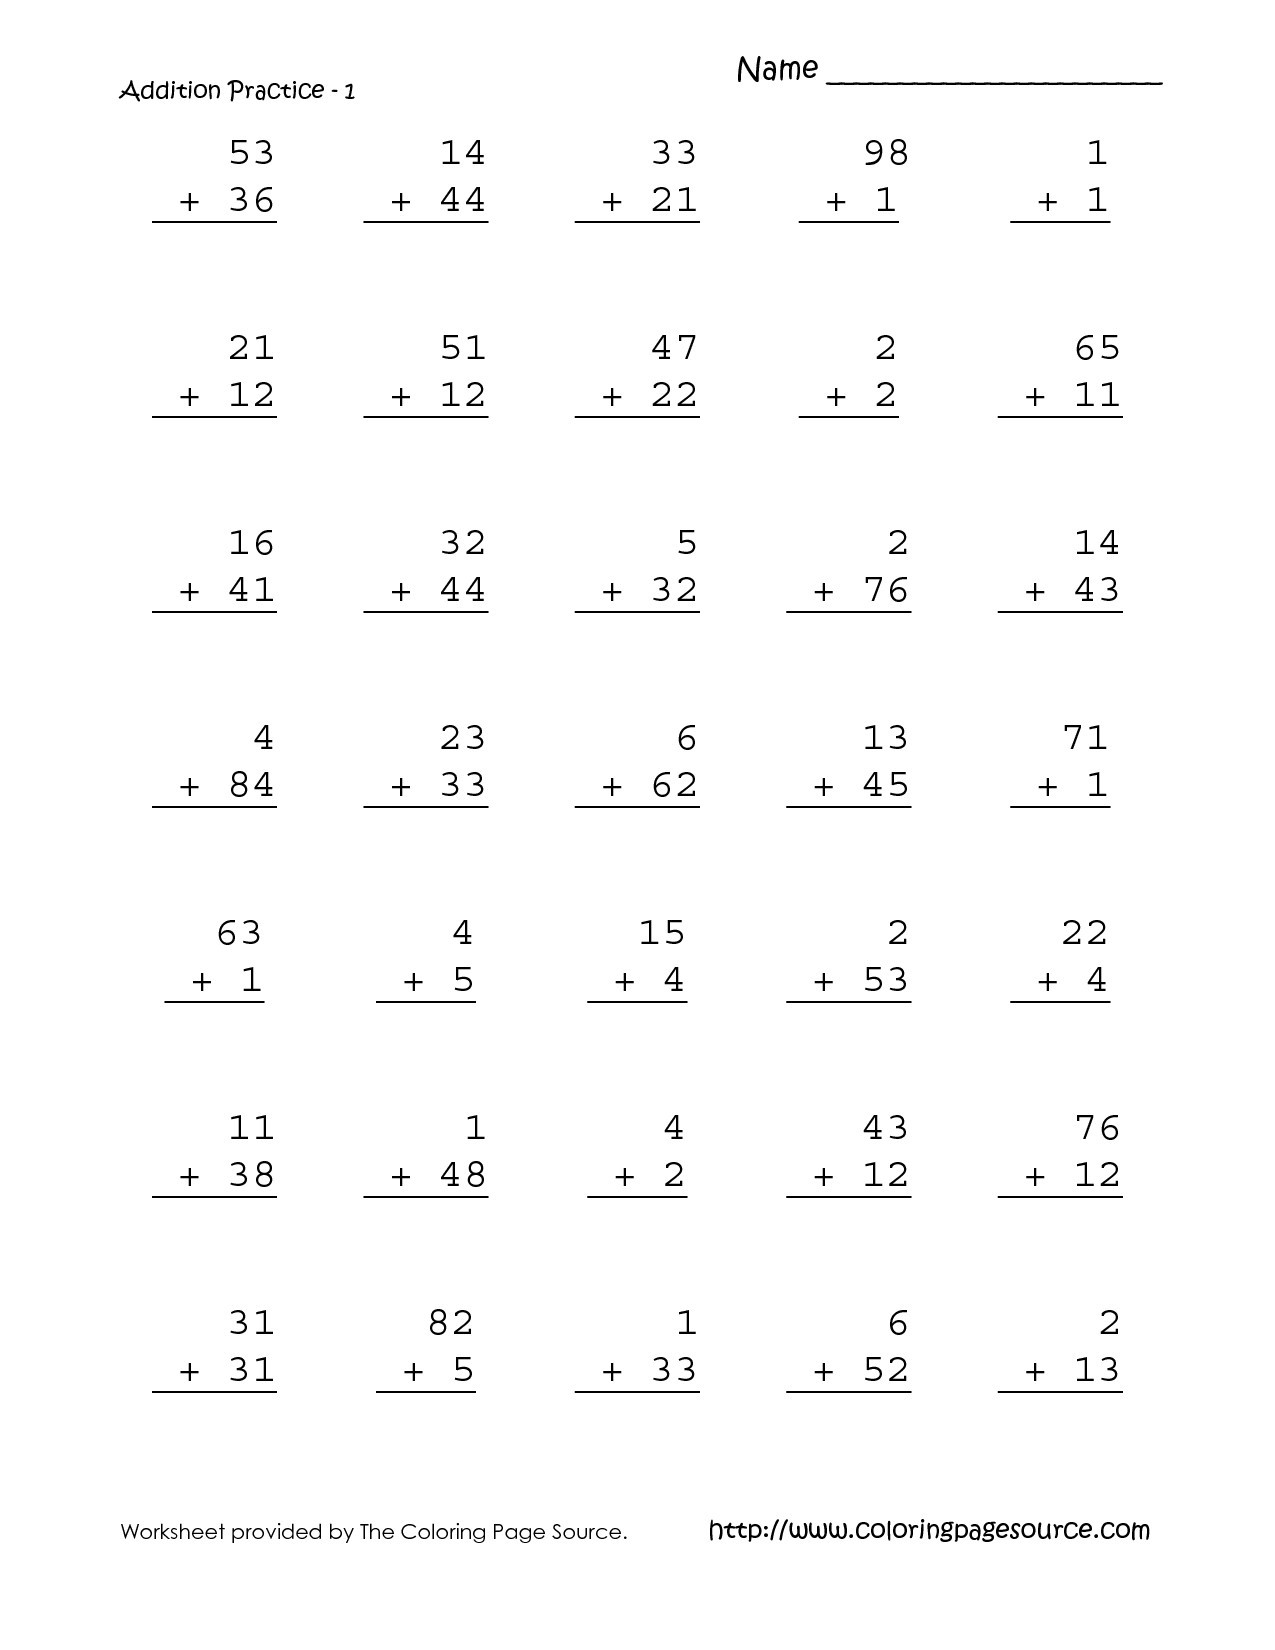 4-free-math-worksheets-second-grade-2-addition-adding-whole-tens-3-addends